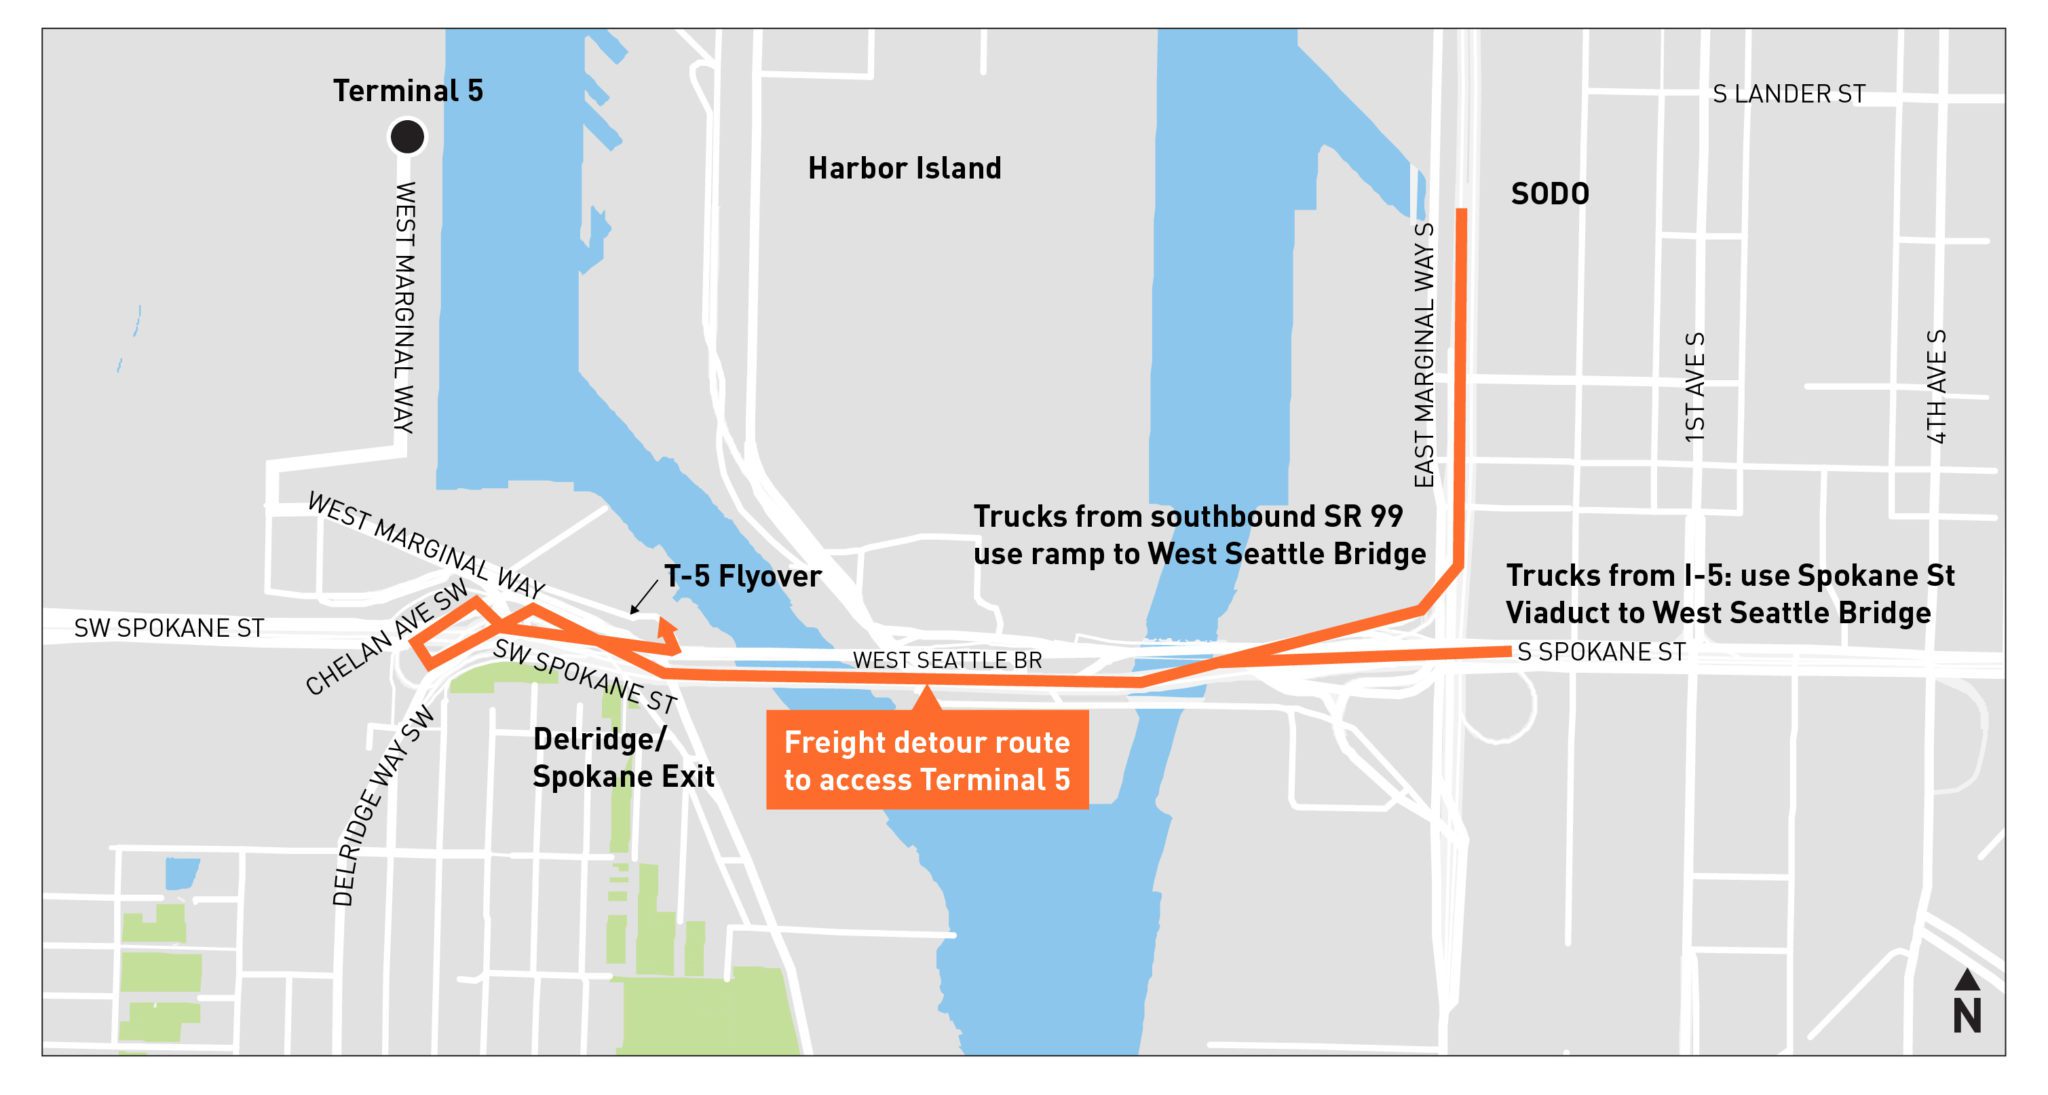 Map detailing freight detour routes to access Terminal 5. The route is shown in orange, for truck drivers arriving from I-5 or SR 99.